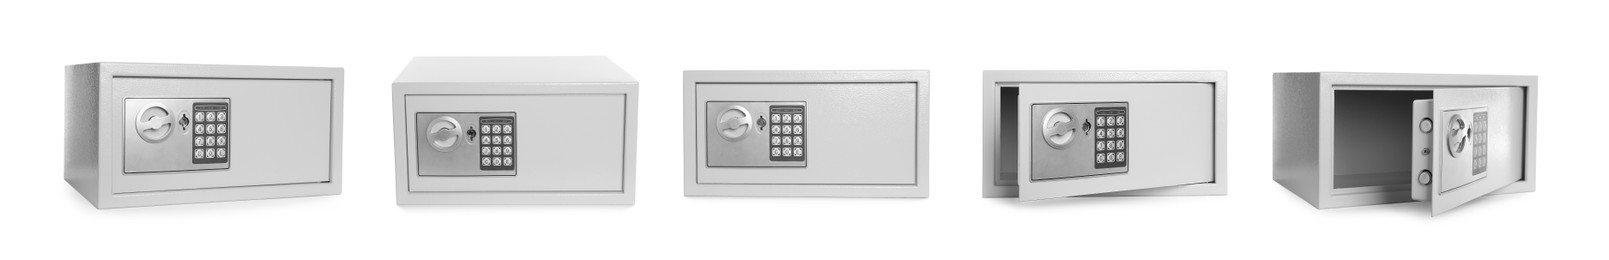 Image of Steel safe on white background, view from different sides